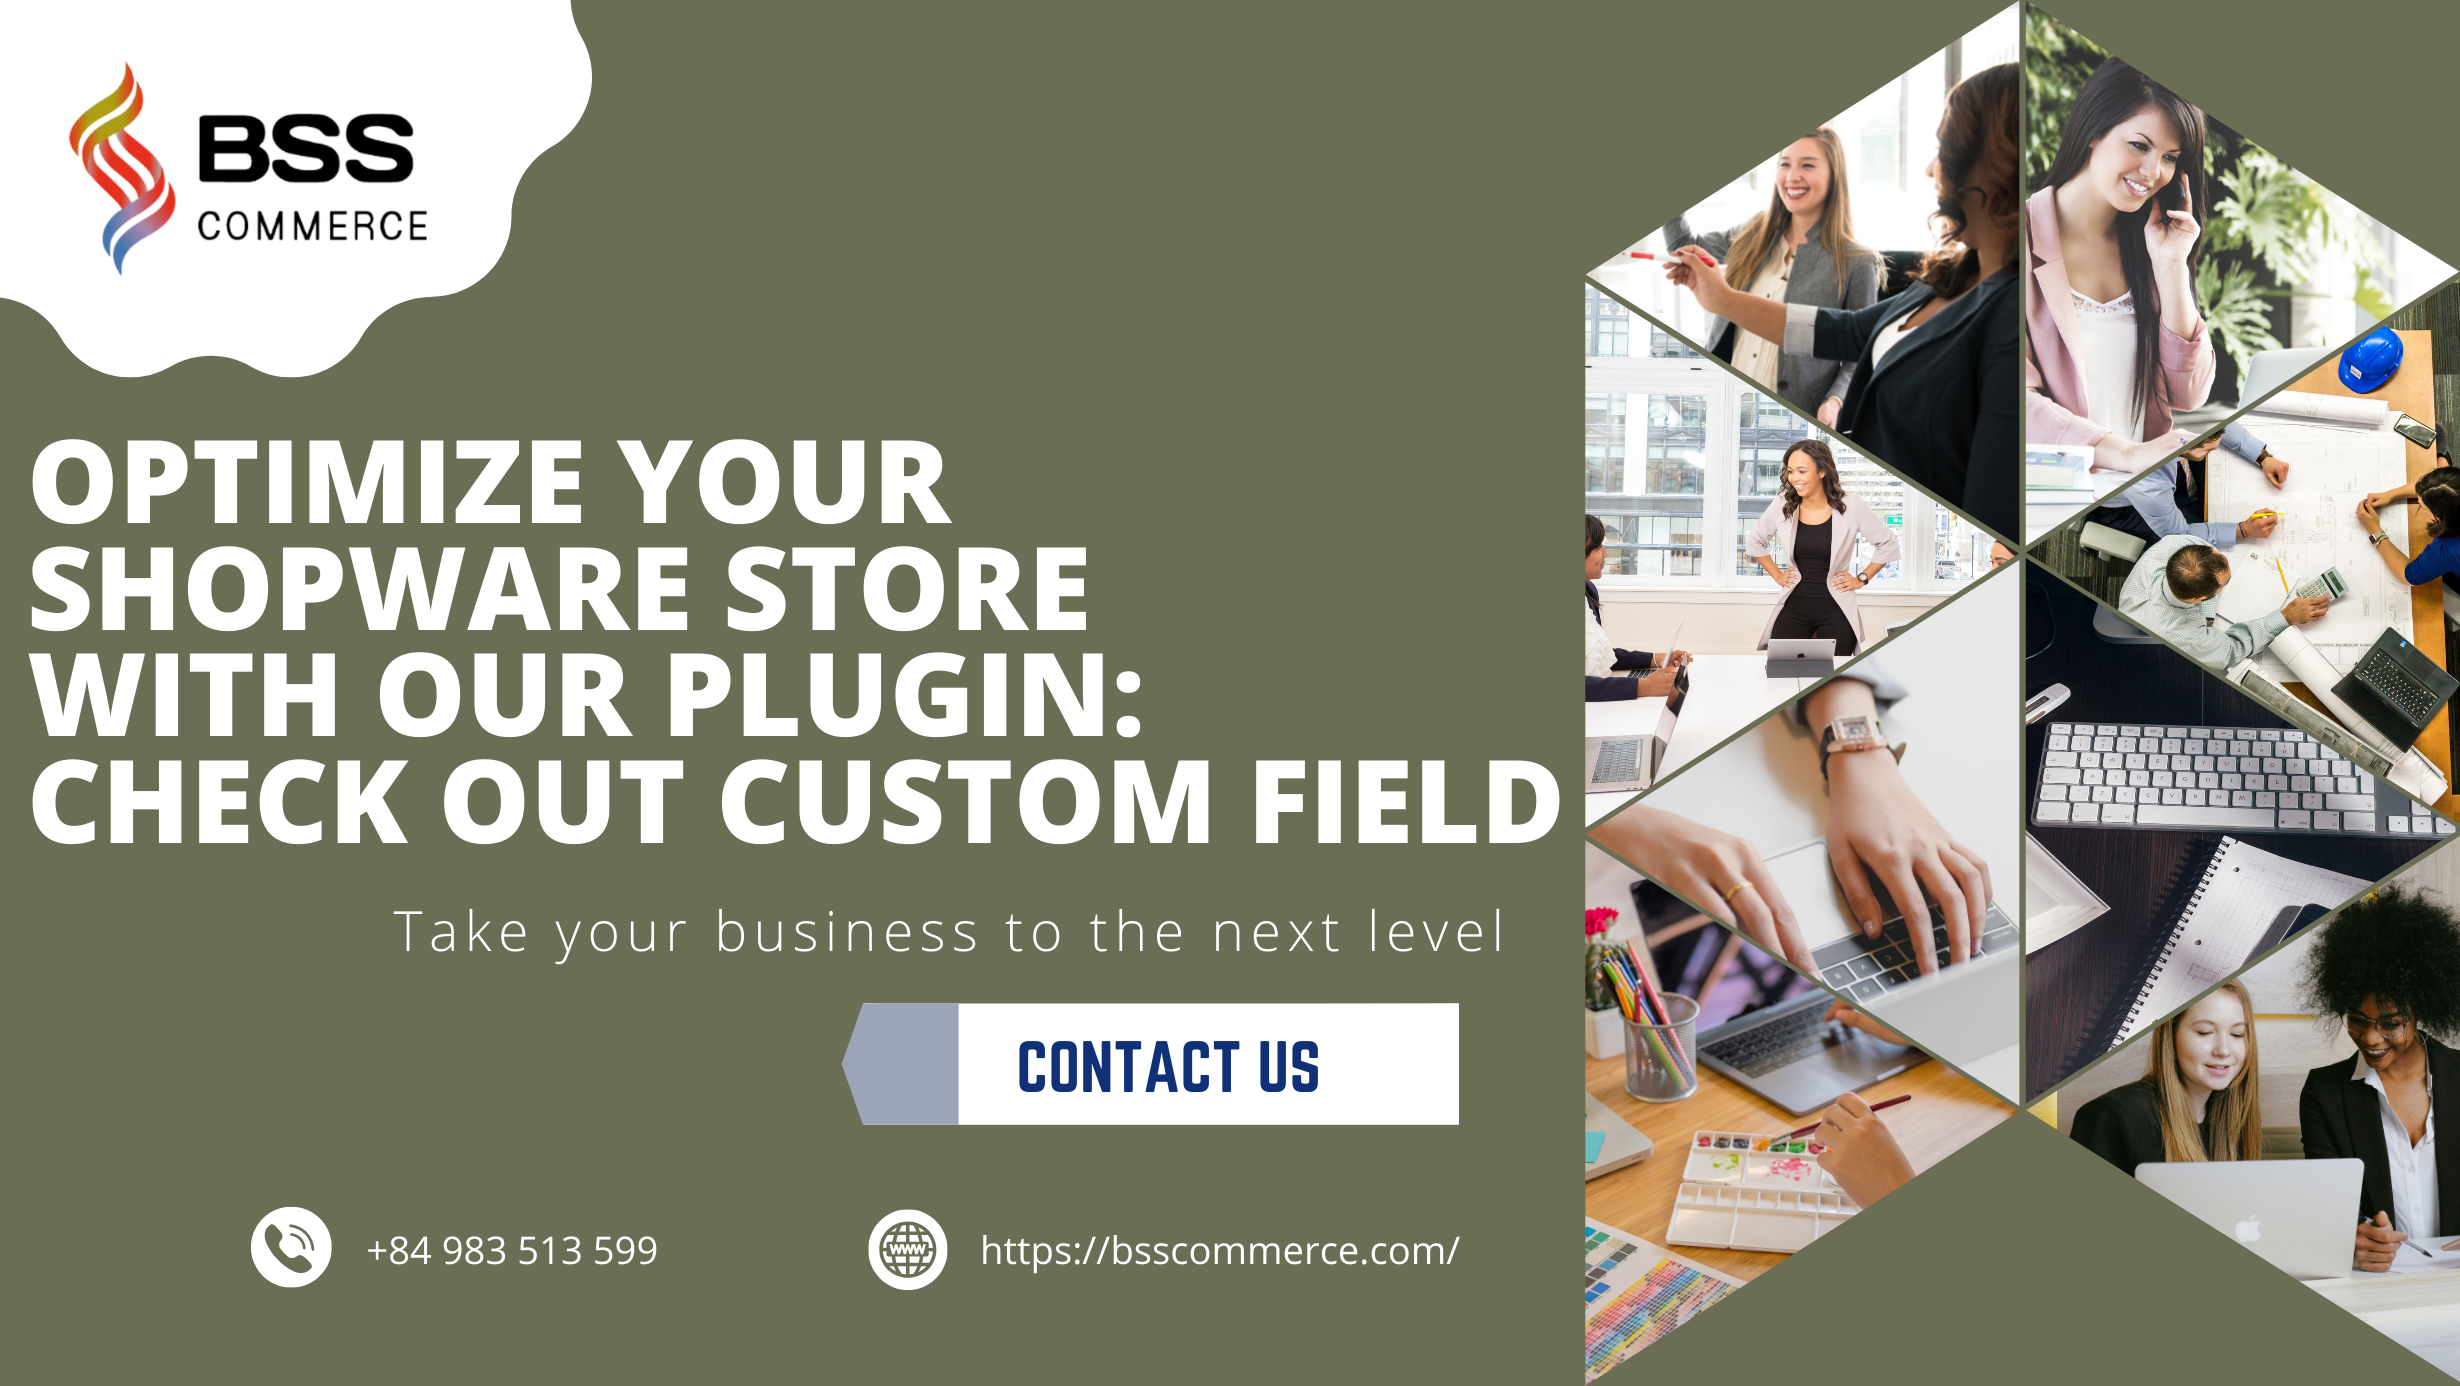 Optimize your Shopware store with BSS Commerce’s plugin - Checkout custom field